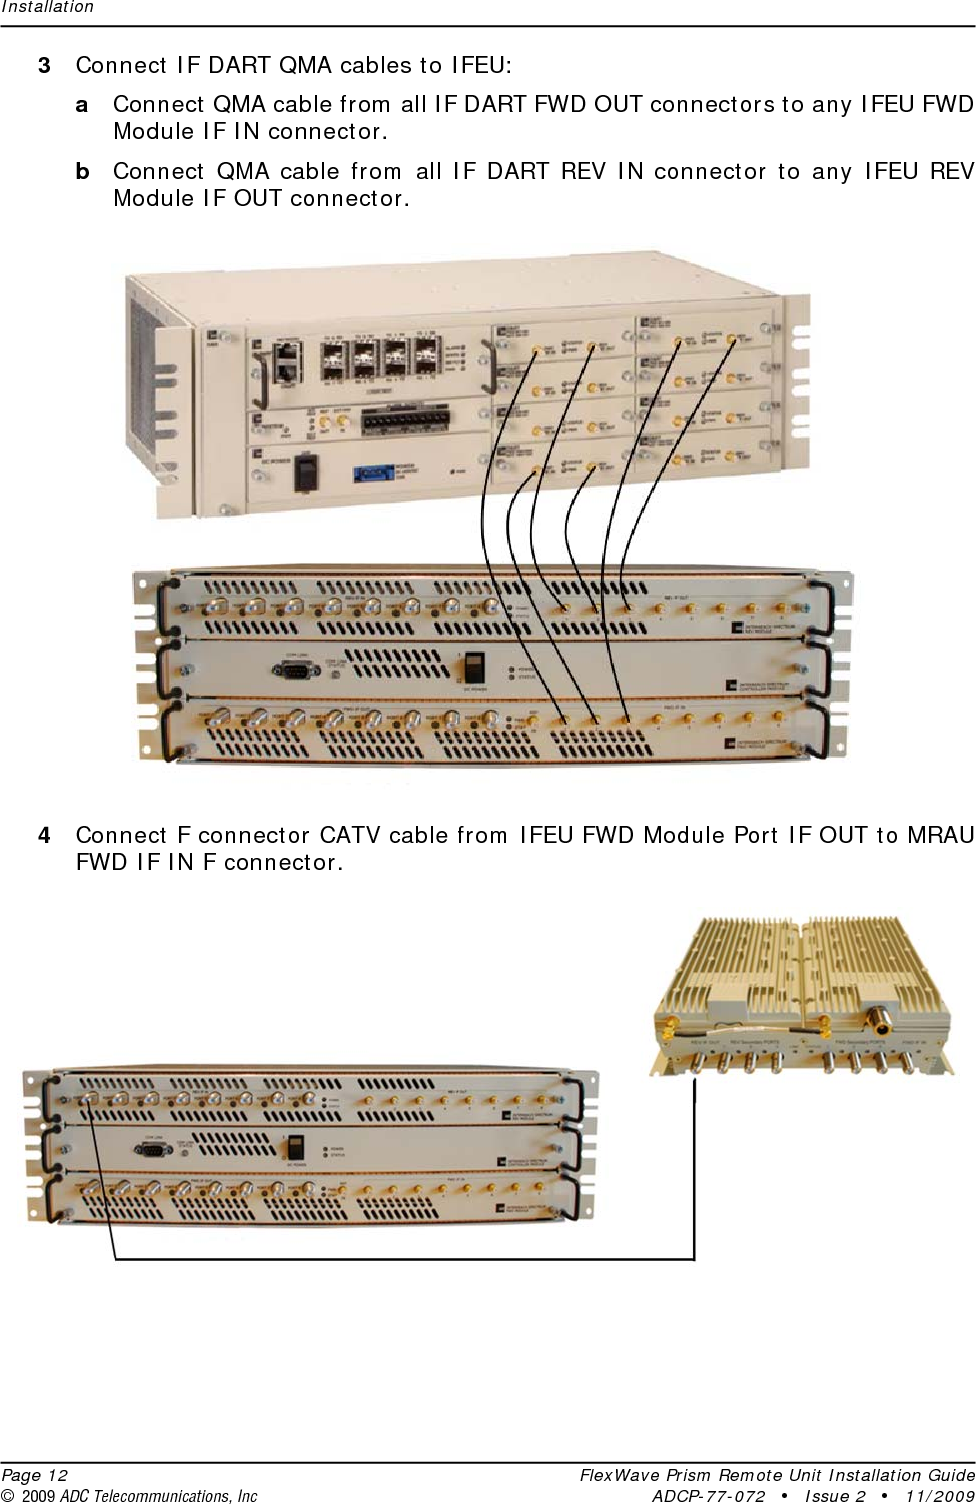 Installation  Page 12 FlexWave Prism Remote Unit Installation Guide© 2009 ADC Telecommunications, Inc ADCP-77-072 • Issue 2 • 11/20093Connect IF DART QMA cables to IFEU:aConnect QMA cable from all IF DART FWD OUT connectors to any IFEU FWD Module IF IN connector.bConnect QMA cable from all IF DART REV IN connector to any IFEU REV Module IF OUT connector.4Connect F connector CATV cable from IFEU FWD Module Port IF OUT to MRAU FWD IF IN F connector.